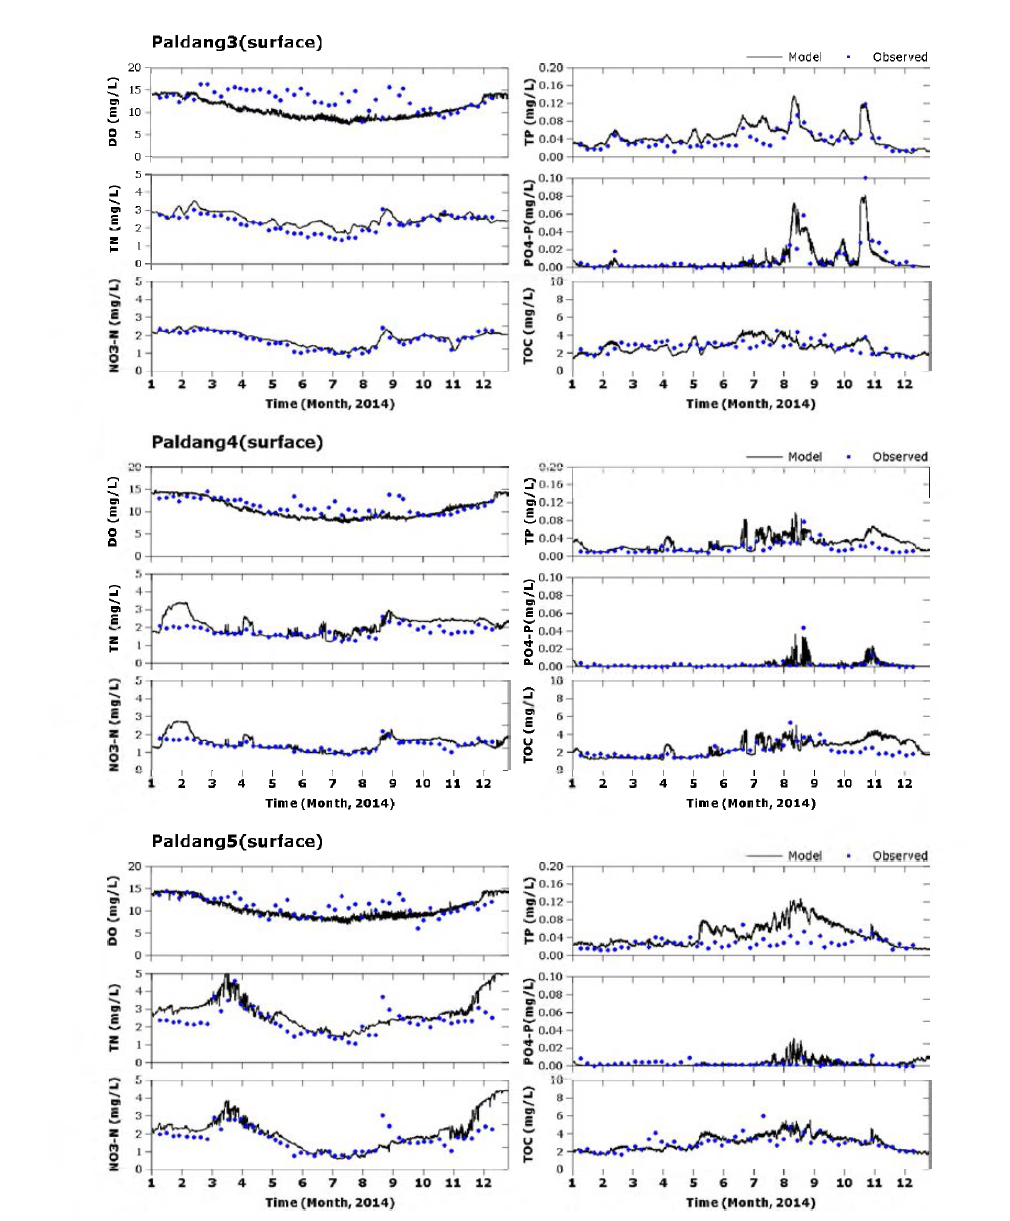 Time series of simulated and observed water quality(DO, TOC, TN, N〇3-N, TP, PO4-P) at Paldang dam 3, 4 and 5 in 2014